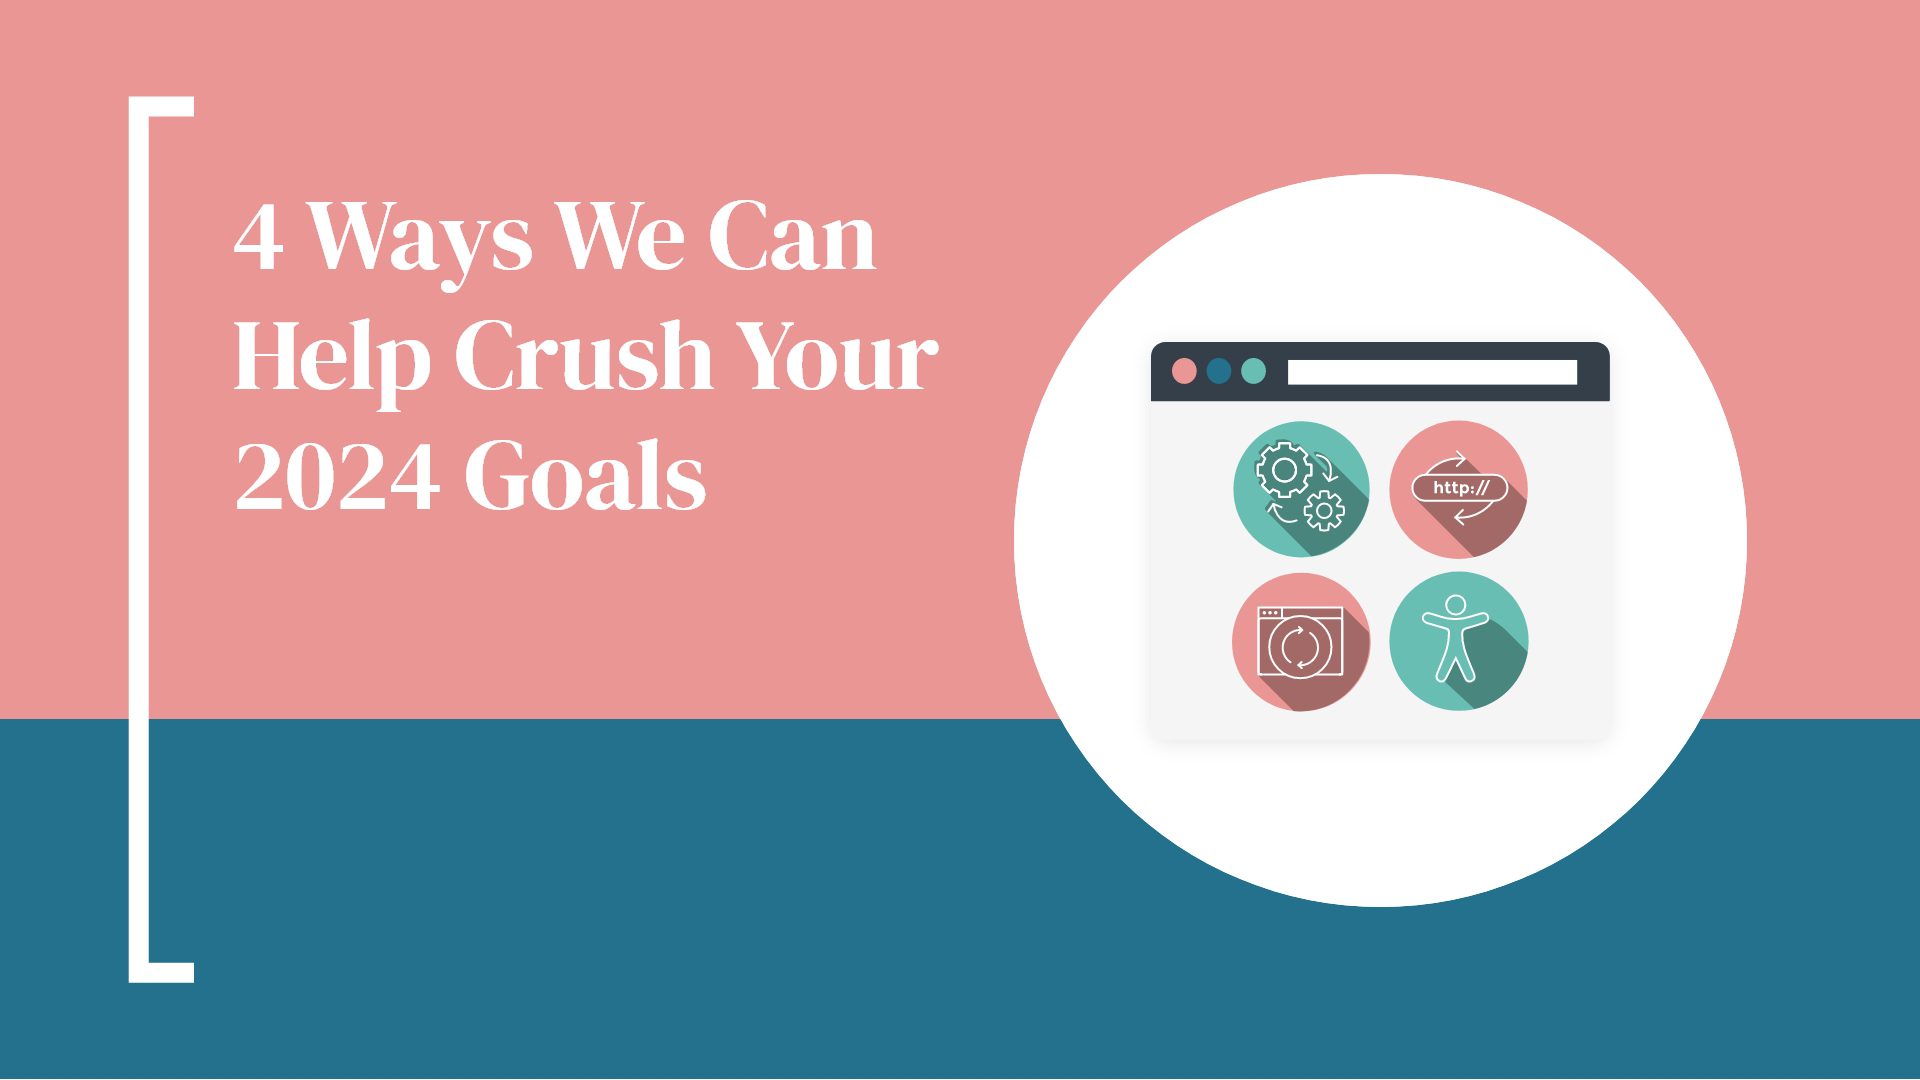 4 Ways We Can Help Crush Your 2024 Goals